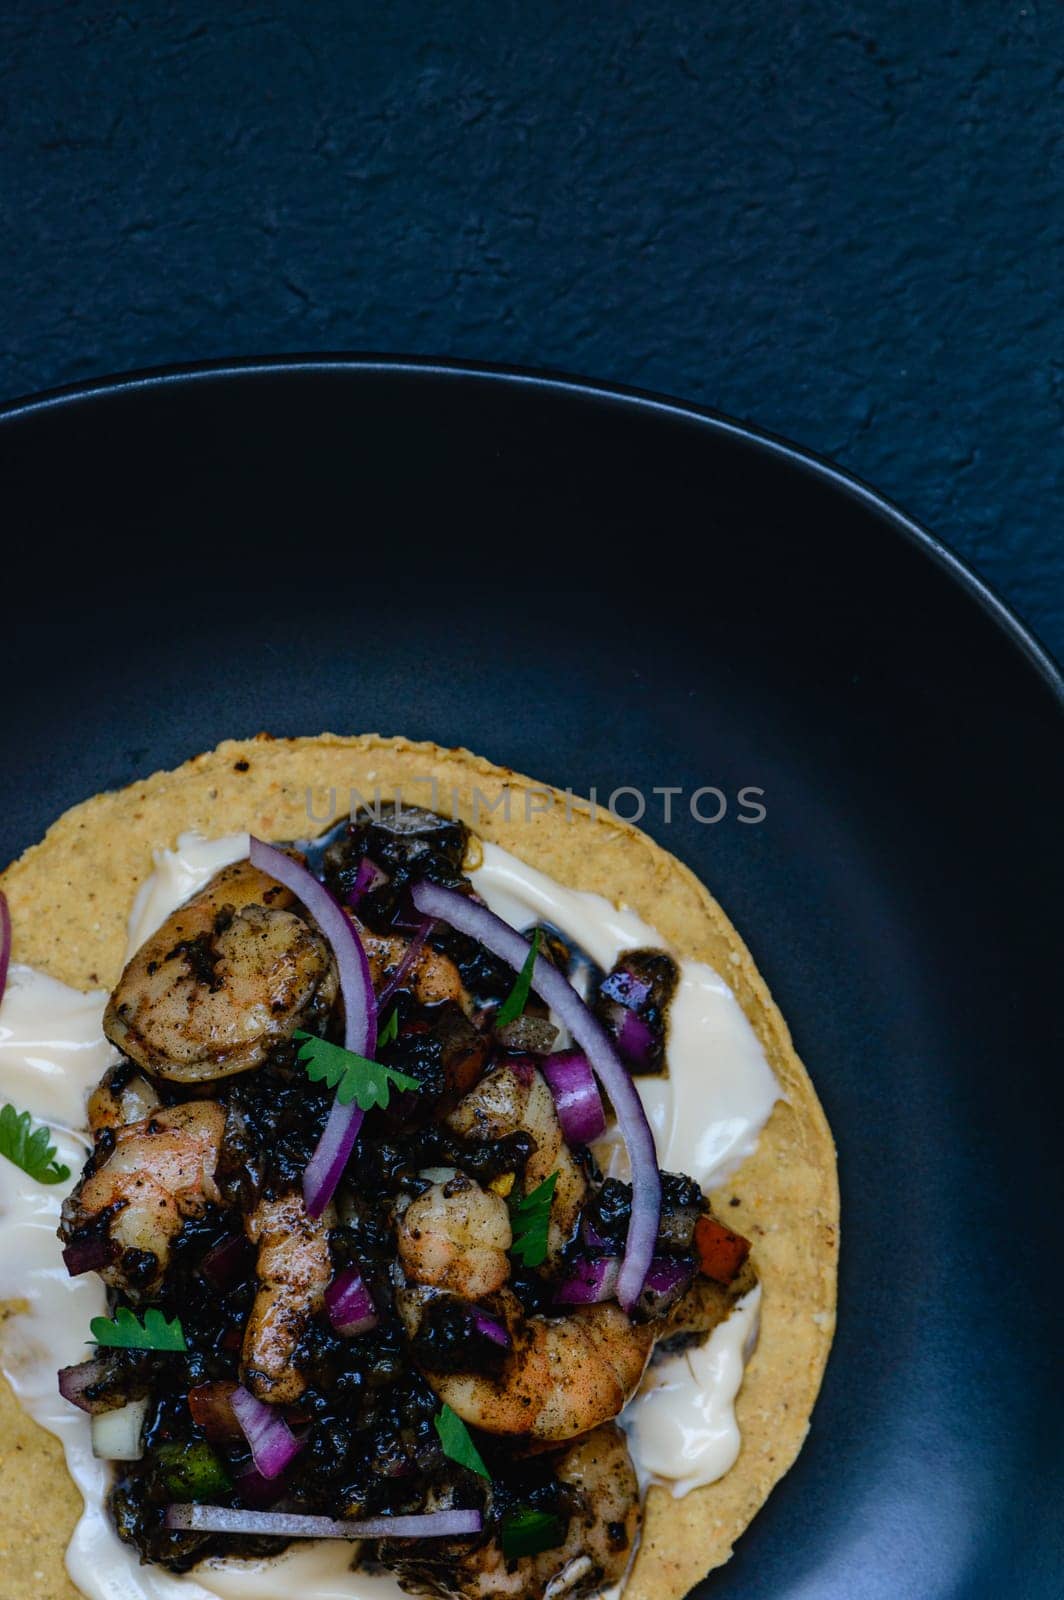 Black shrimp ceviche, Mexican seafood dish made with fresh shrimp, chili ashes and lime juice. Served on a crispy corn tostada and shot on black background.